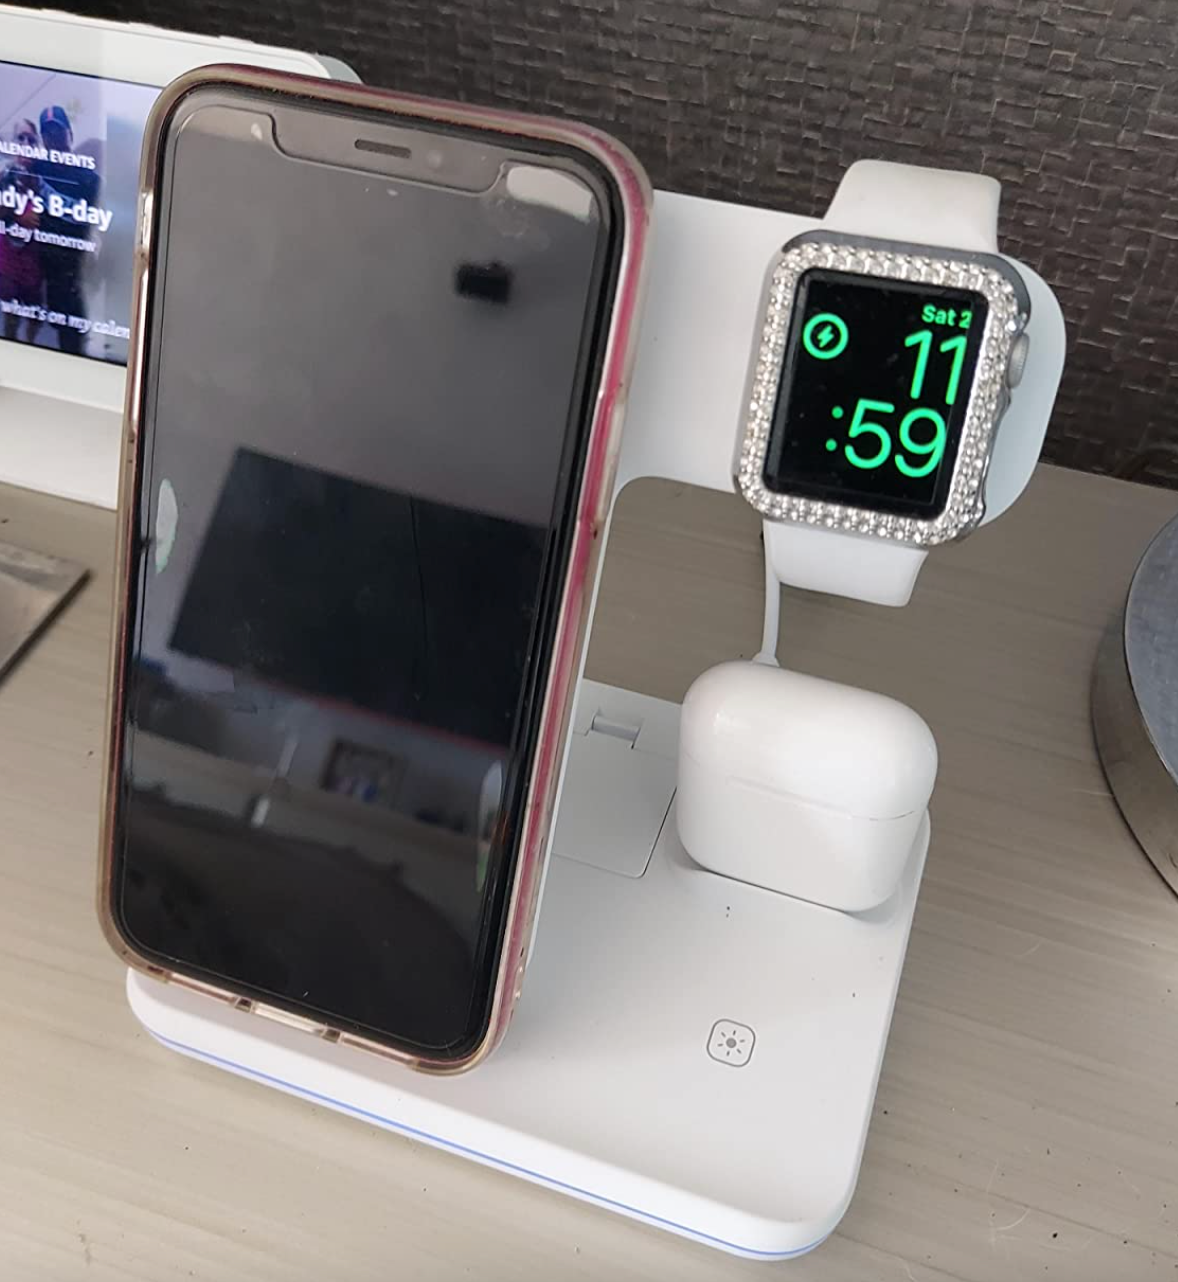 A white charging stand with slots for a phone, earbuds, and watch to charge 